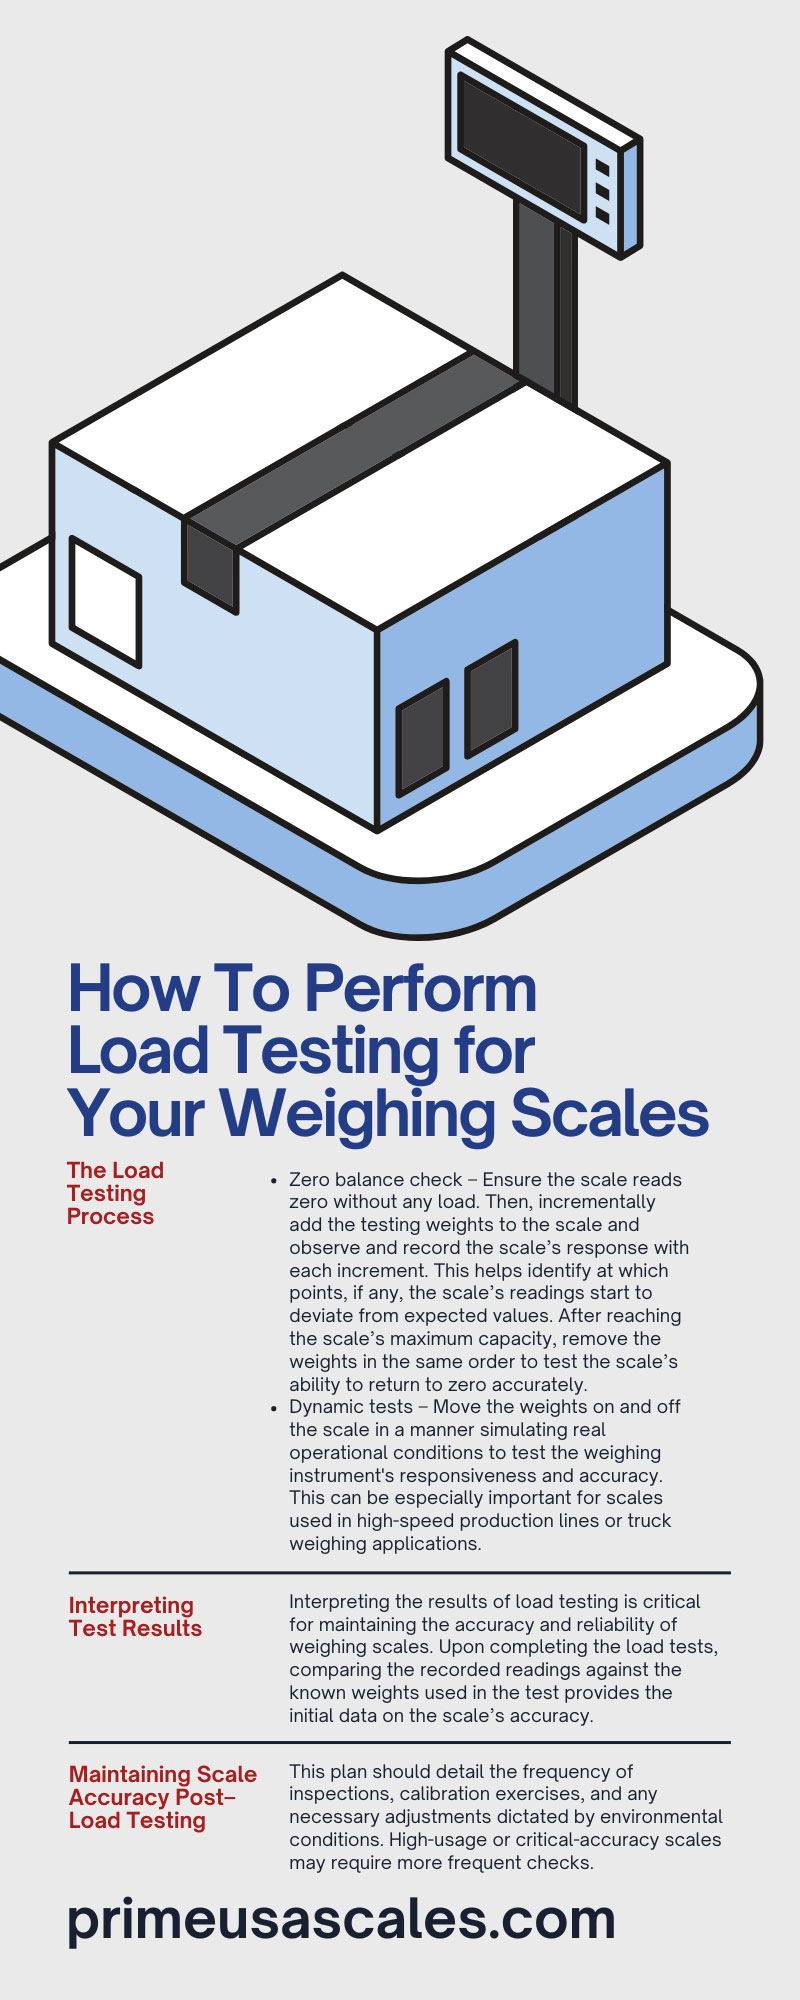 How To Perform Load Testing for Your Weighing Scales